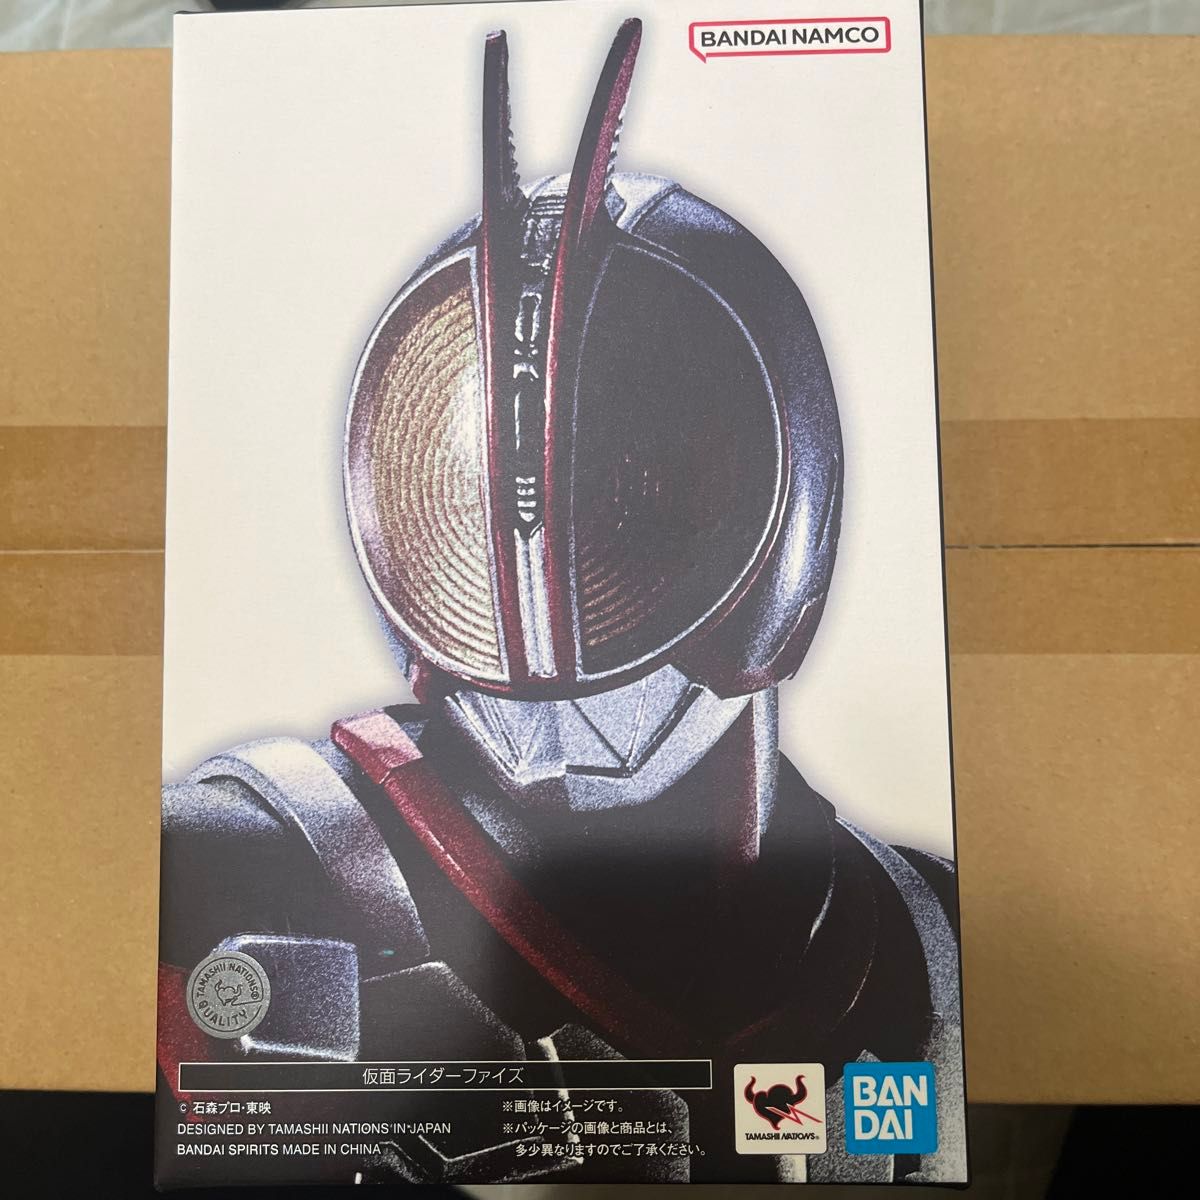 S.H.Figuarts (真骨彫製法) 仮面ライダー555 仮面ライダーファイズ 約145mm 塗装済み可動フィギュア